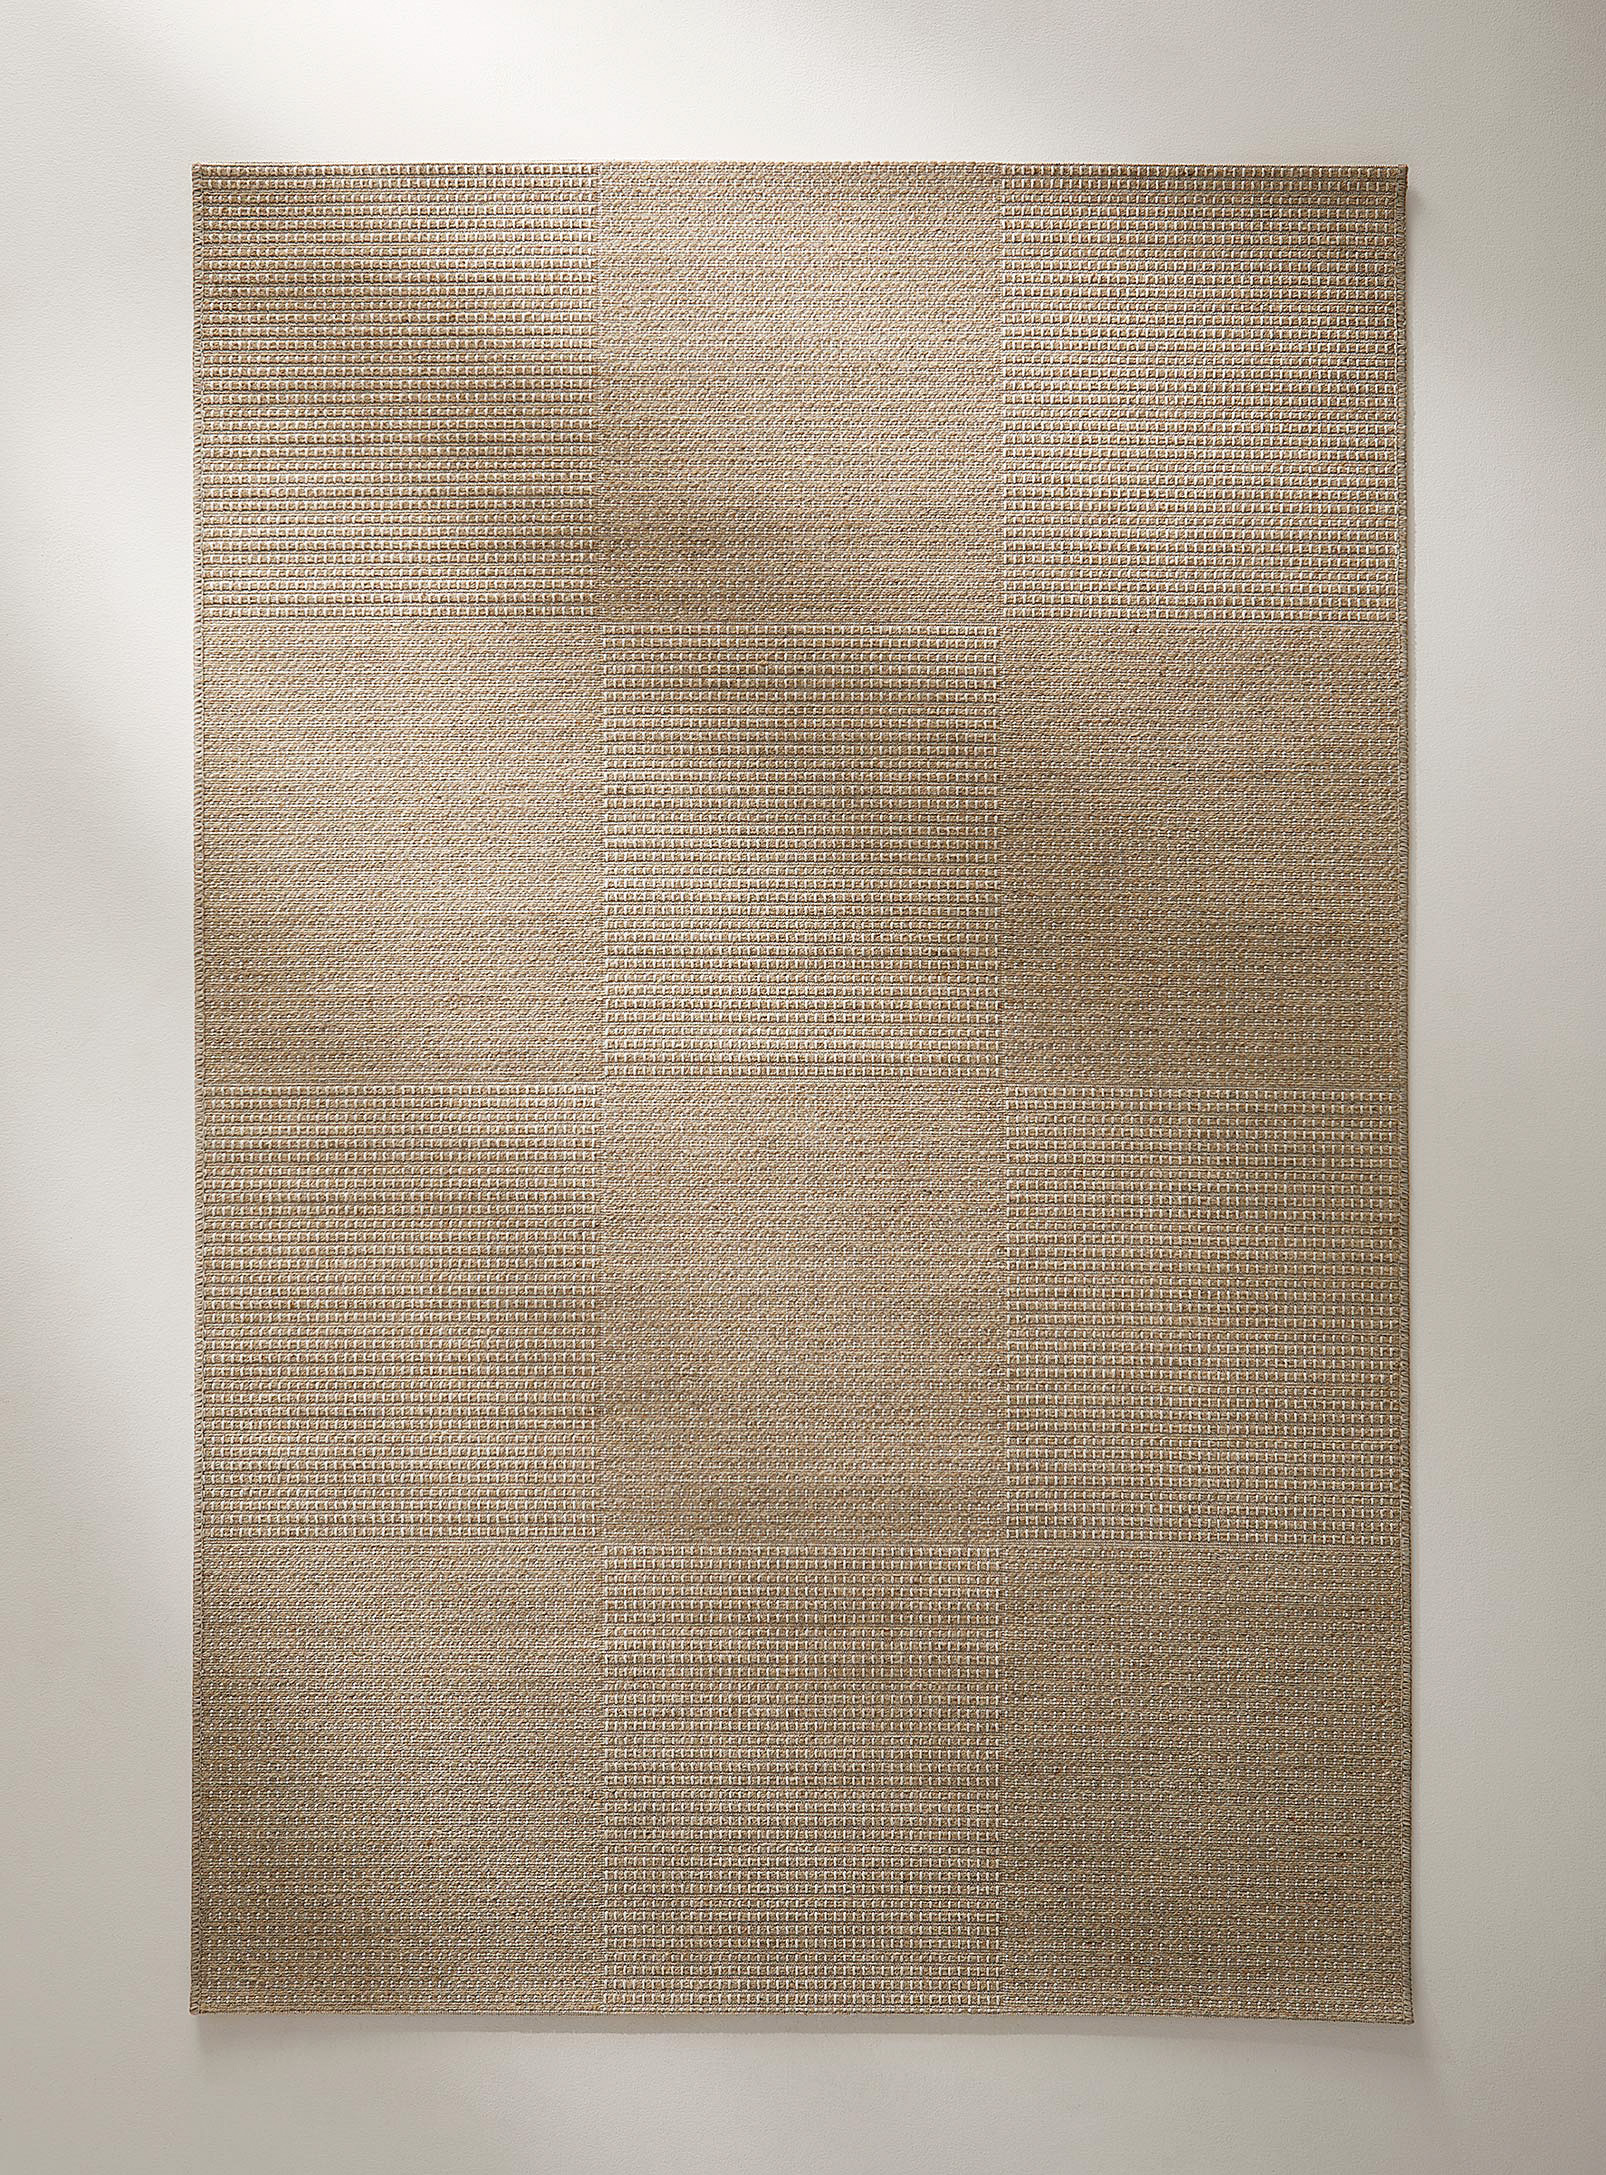 Simons Maison Neutral Checkers Rug See Available Sizes In Cream Beige